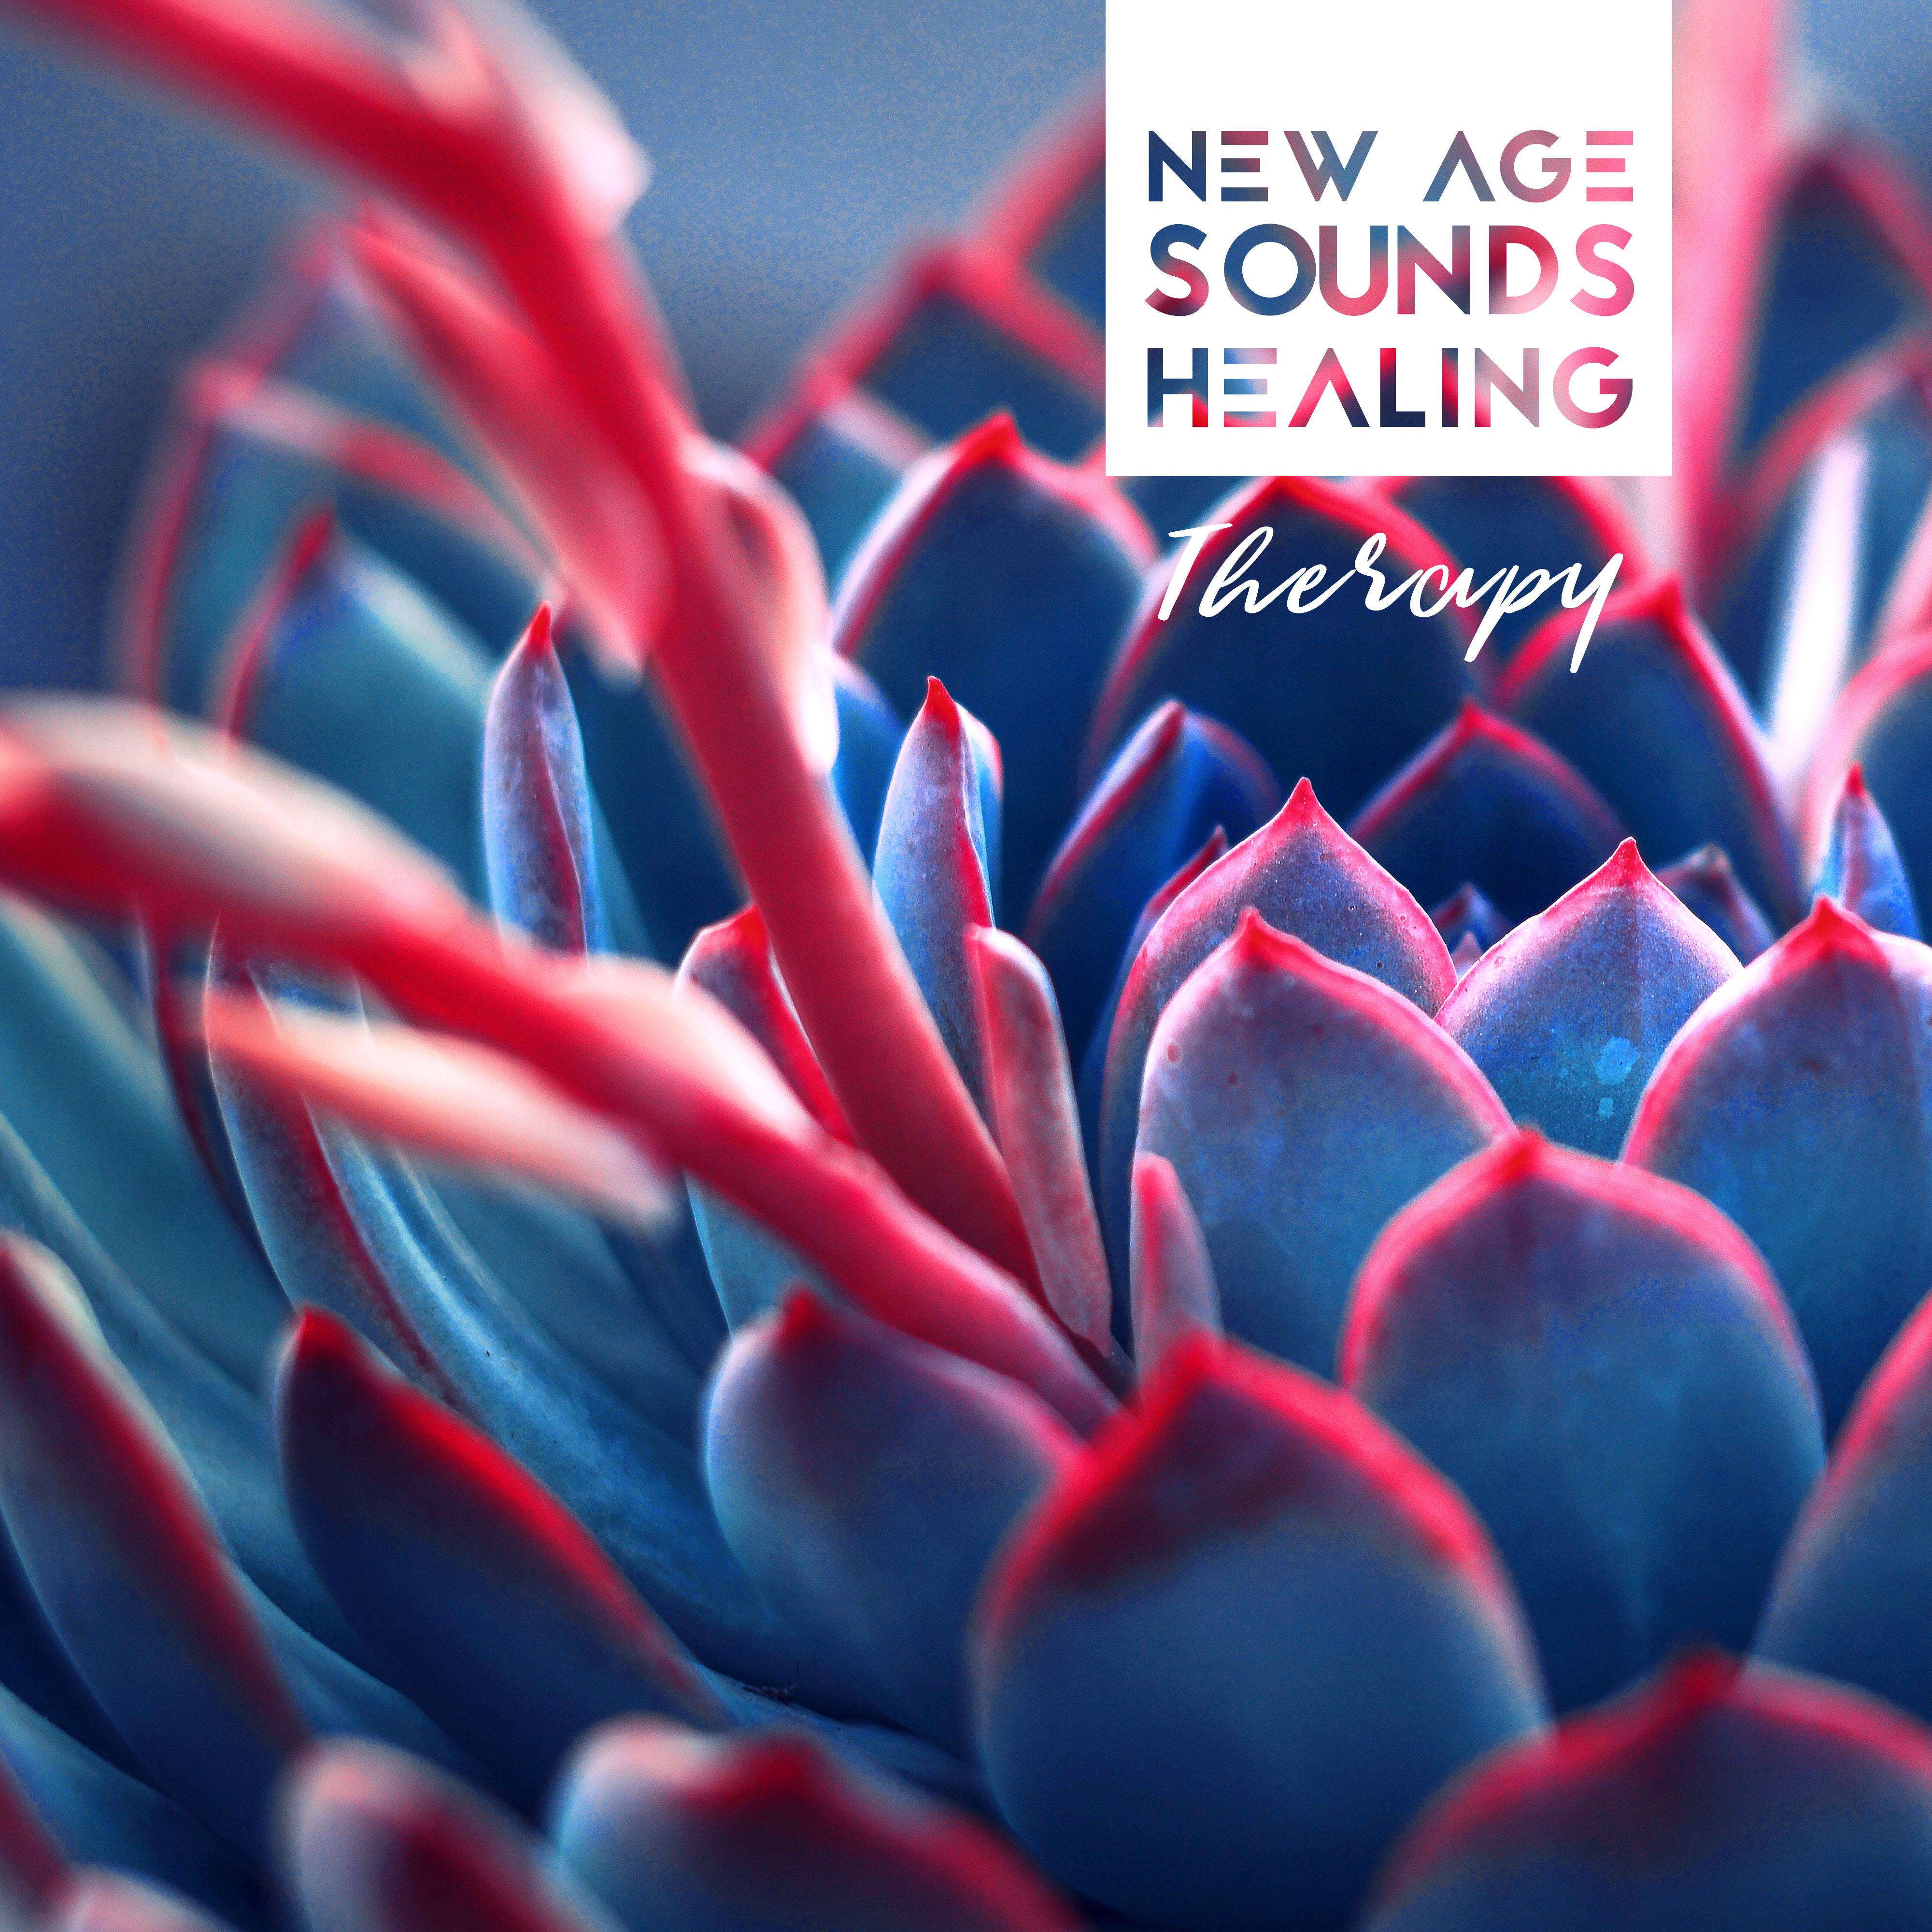 New Age Sounds Healing Therapy – Yoga & Relax Music Compilation